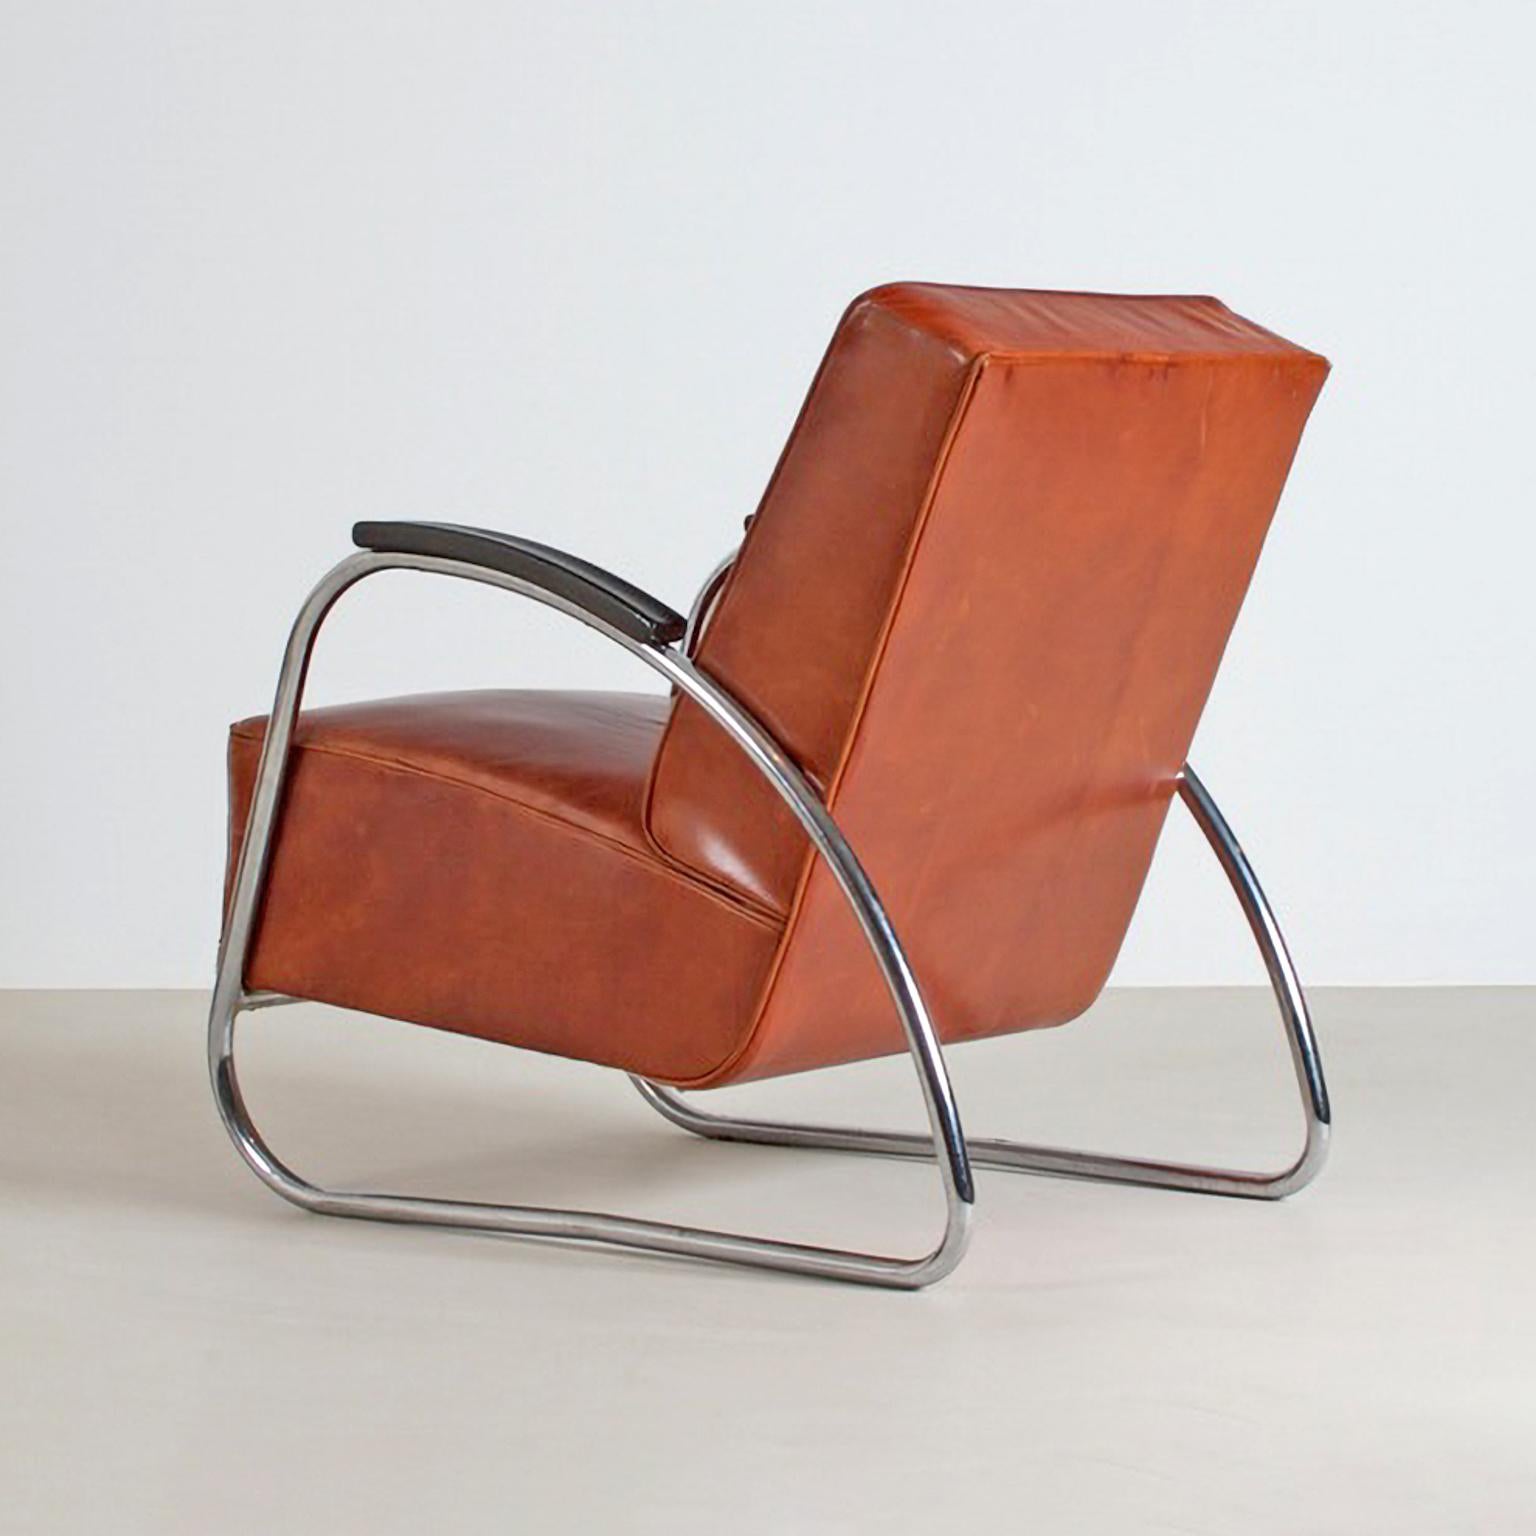 German Customizable Modernist Club Chair by Mauser, Chromed Metal, Leather Upholstery For Sale